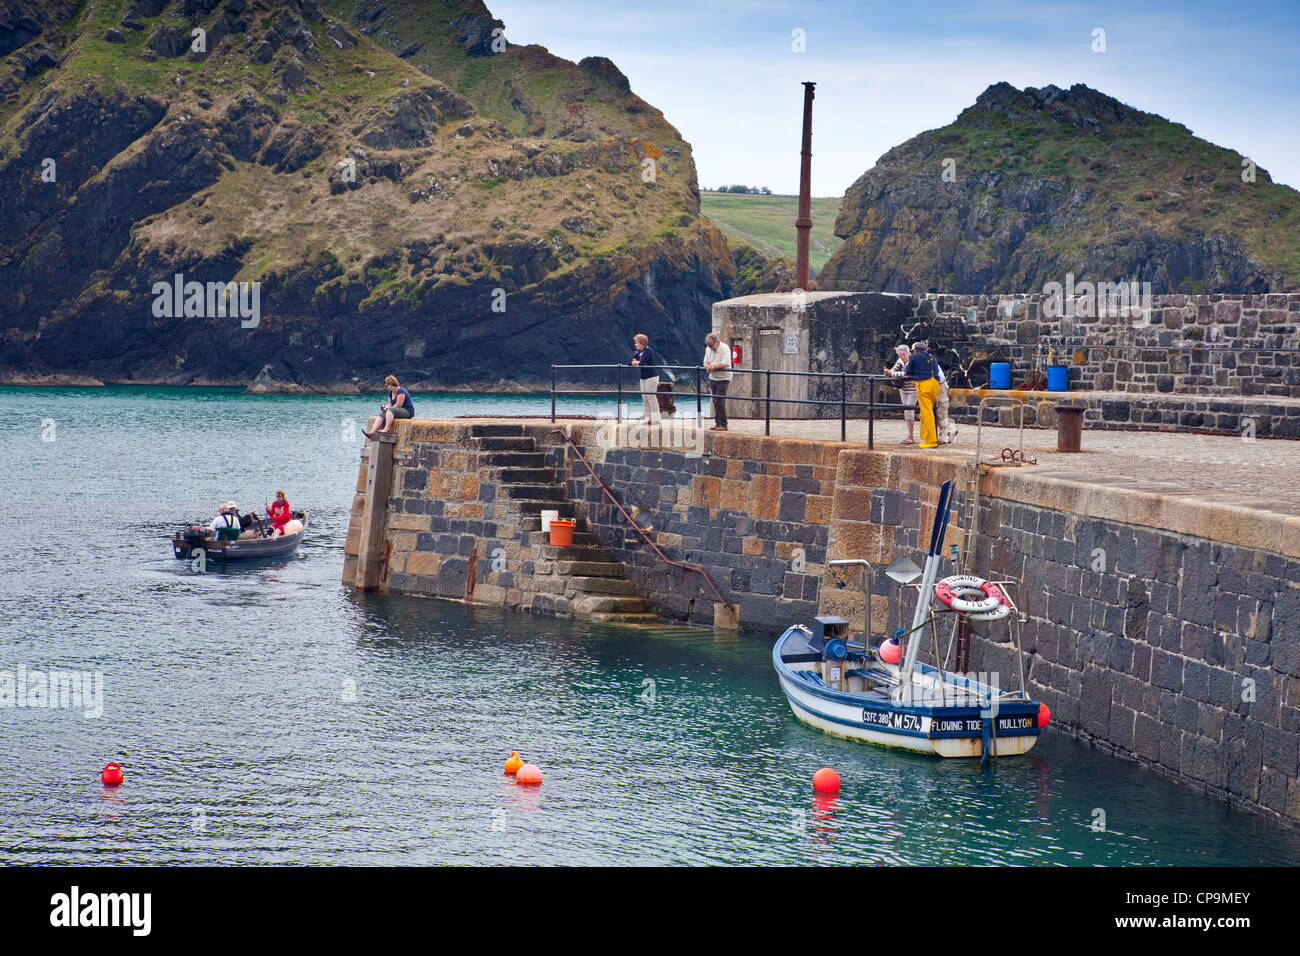 Fishing boats in and leaving the harbour at Mullion Cove on the Lizard Peninsula, Cornwall, England, UK Stock Photo